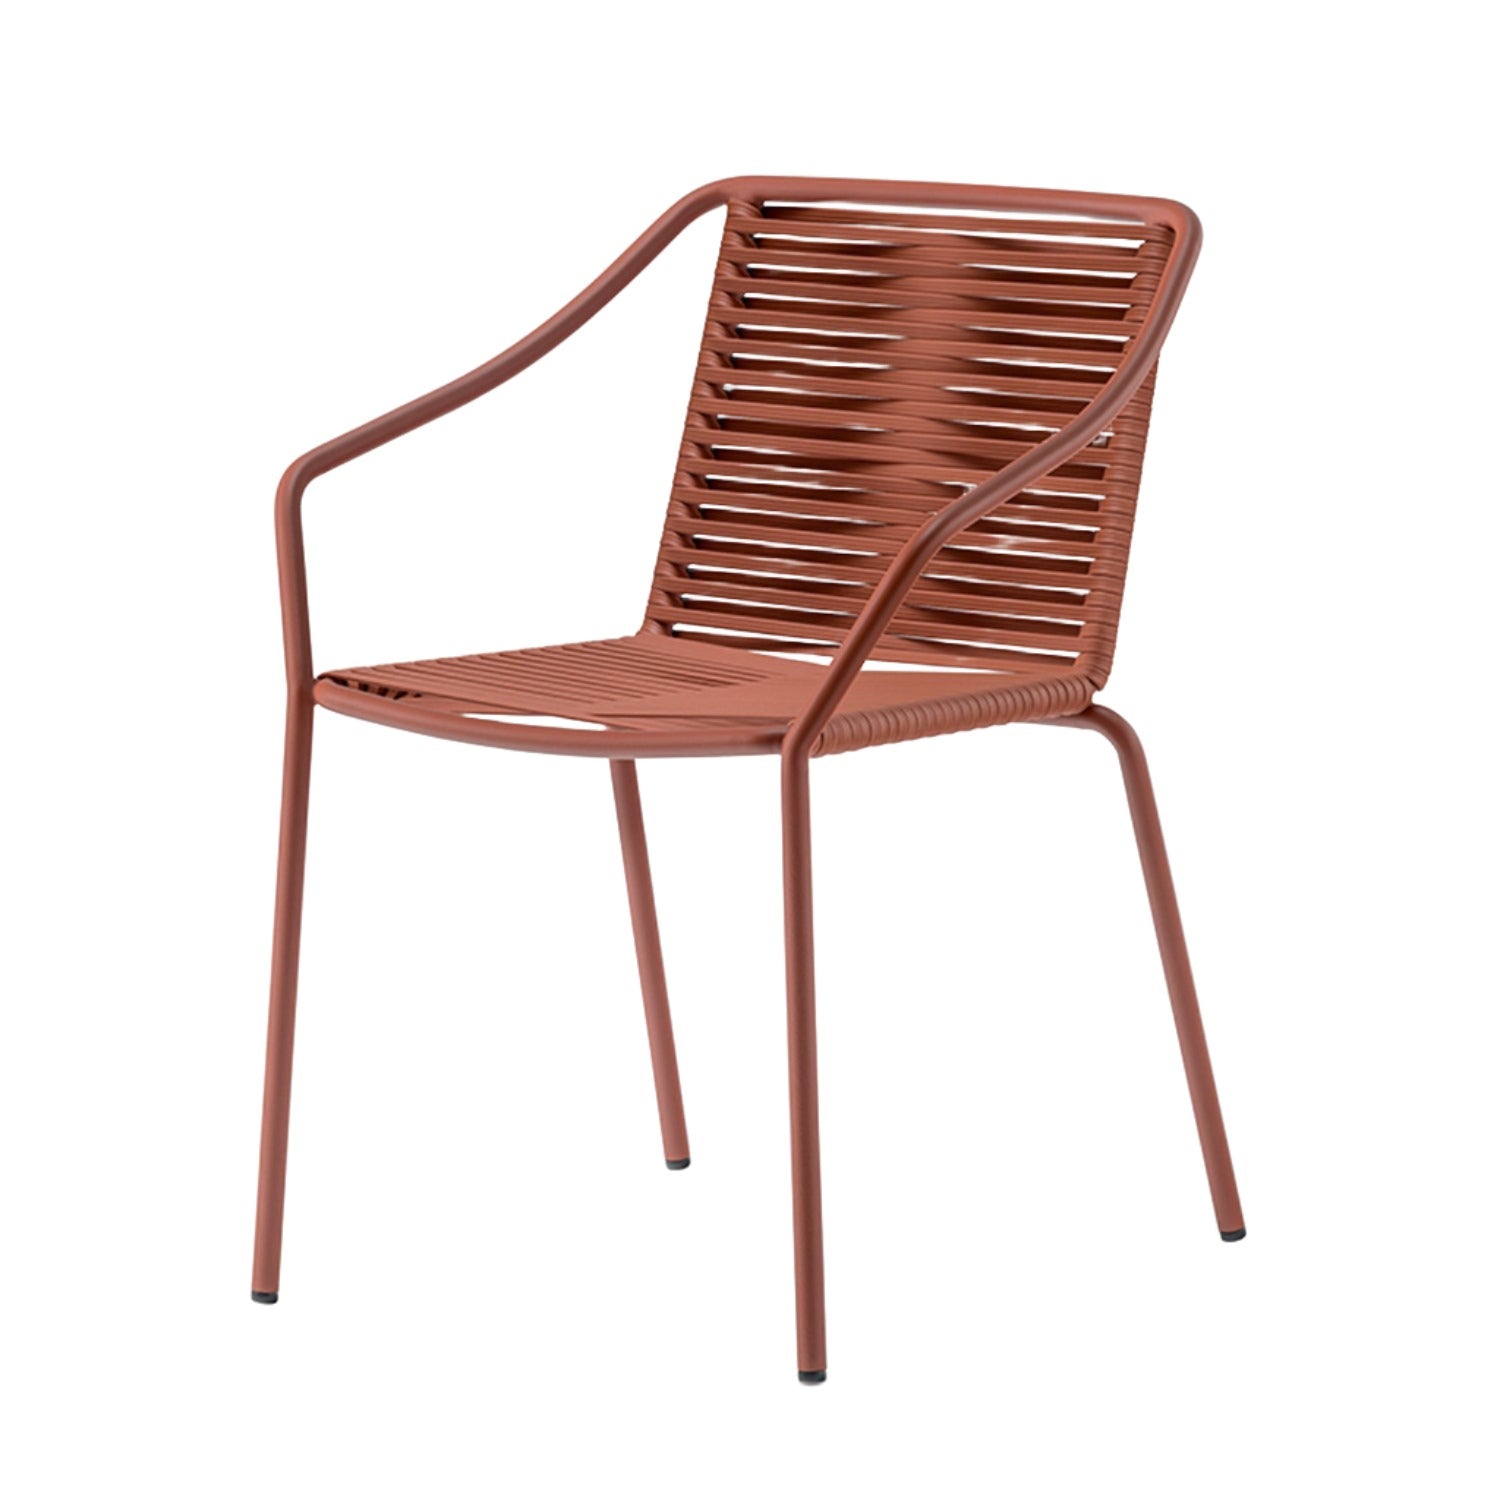 Pedrali Philia Outdoor Dining Chair in terracotta